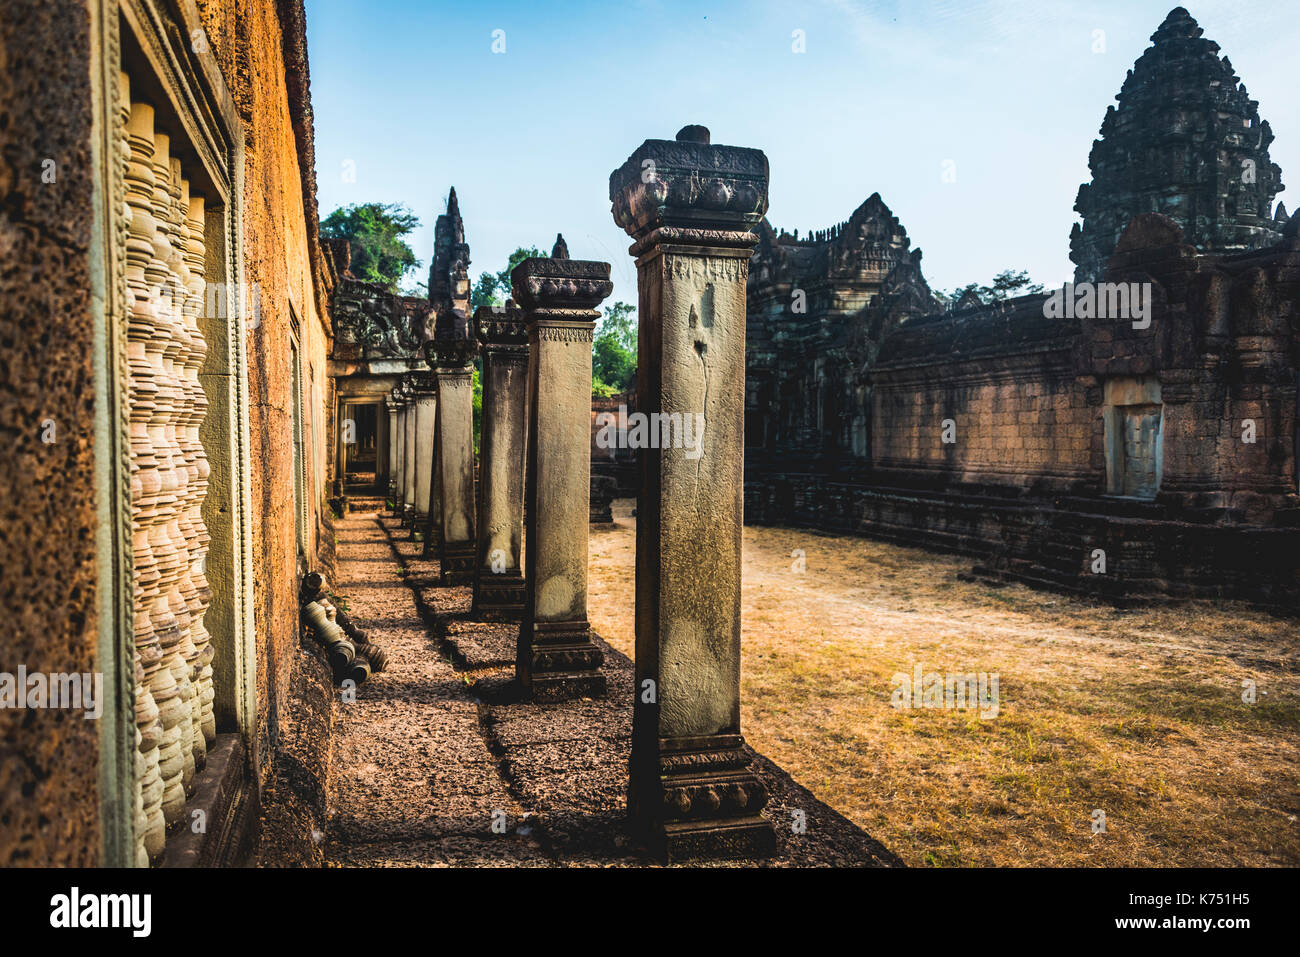 Arcade and courtyard, ruined temple, Banteay Samre Temple, Angkor Archaeological Park, Siem Reap Province, Cambodia Stock Photo